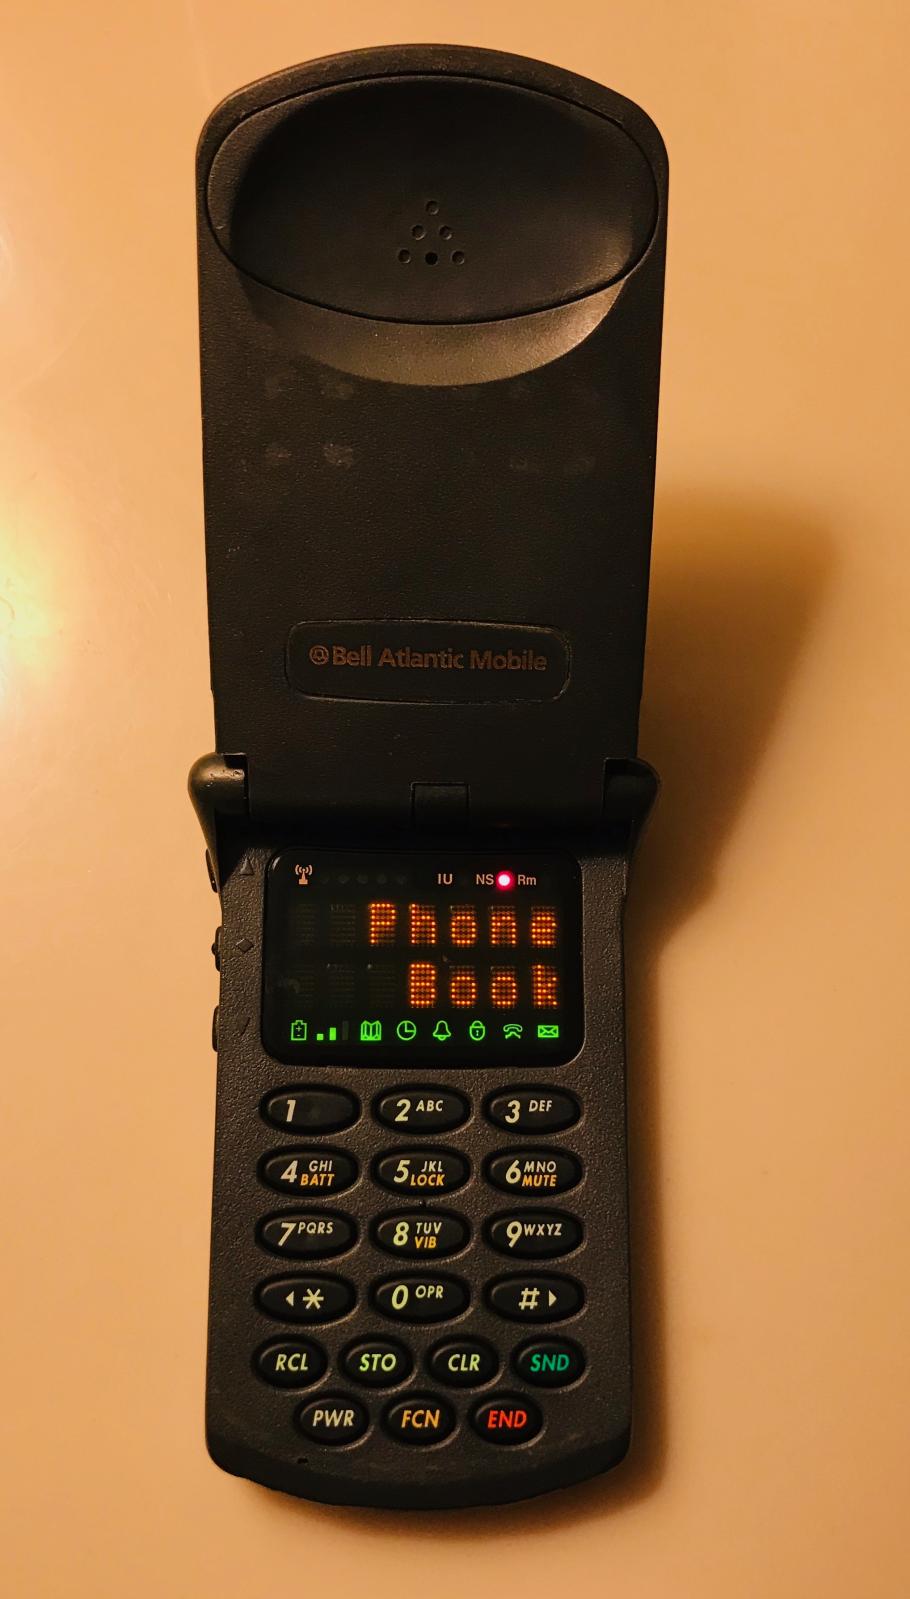 A black flip phone, with a small display screen that read "Phone Book"